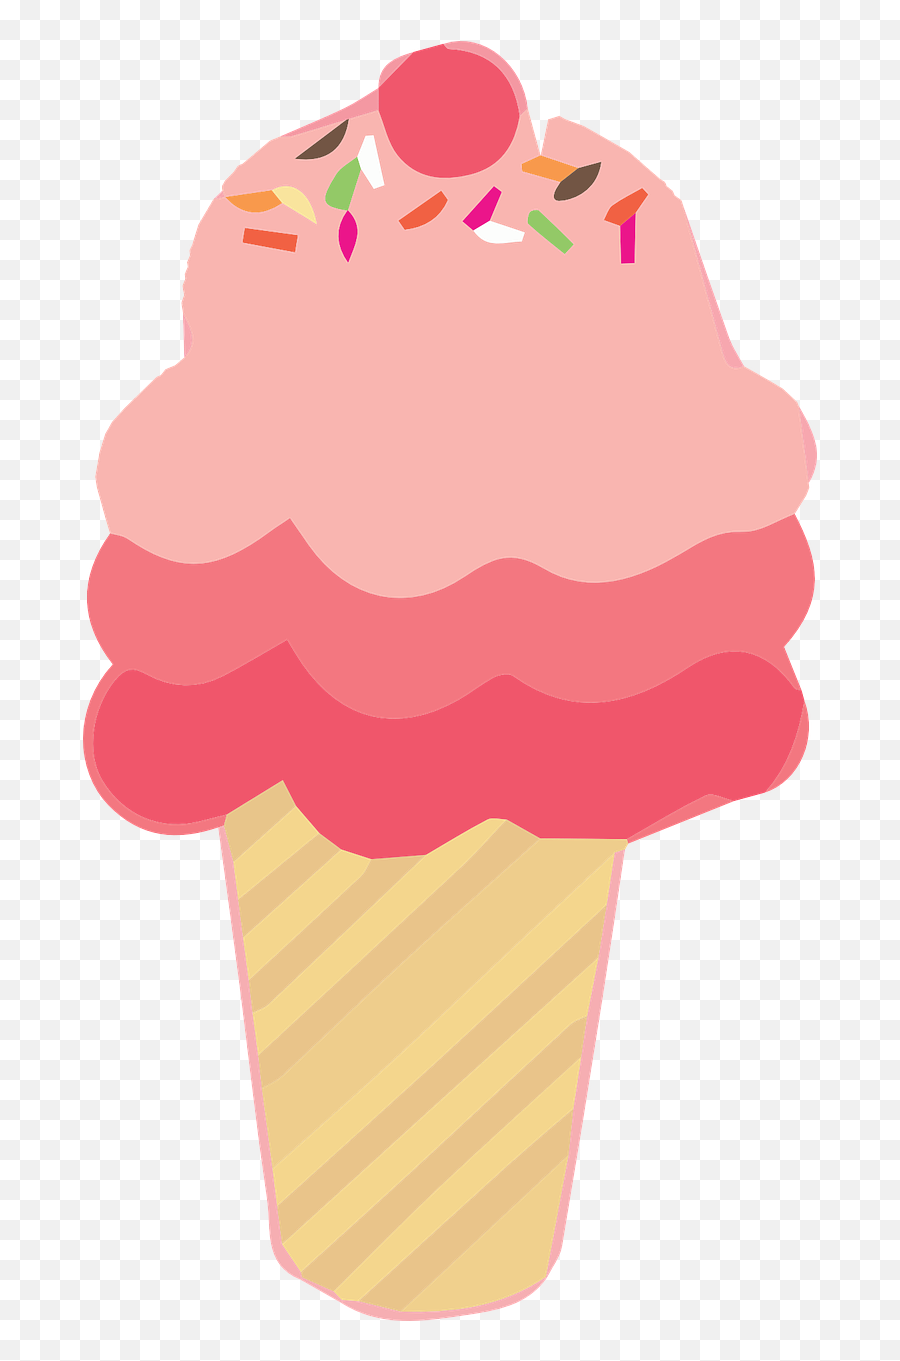 Cone Food Ice Cream - Free Vector Graphic On Pixabay Transparent Background Cute Transparent Background Ice Cream Clipart Png,Ice Cream Cone Transparent Background